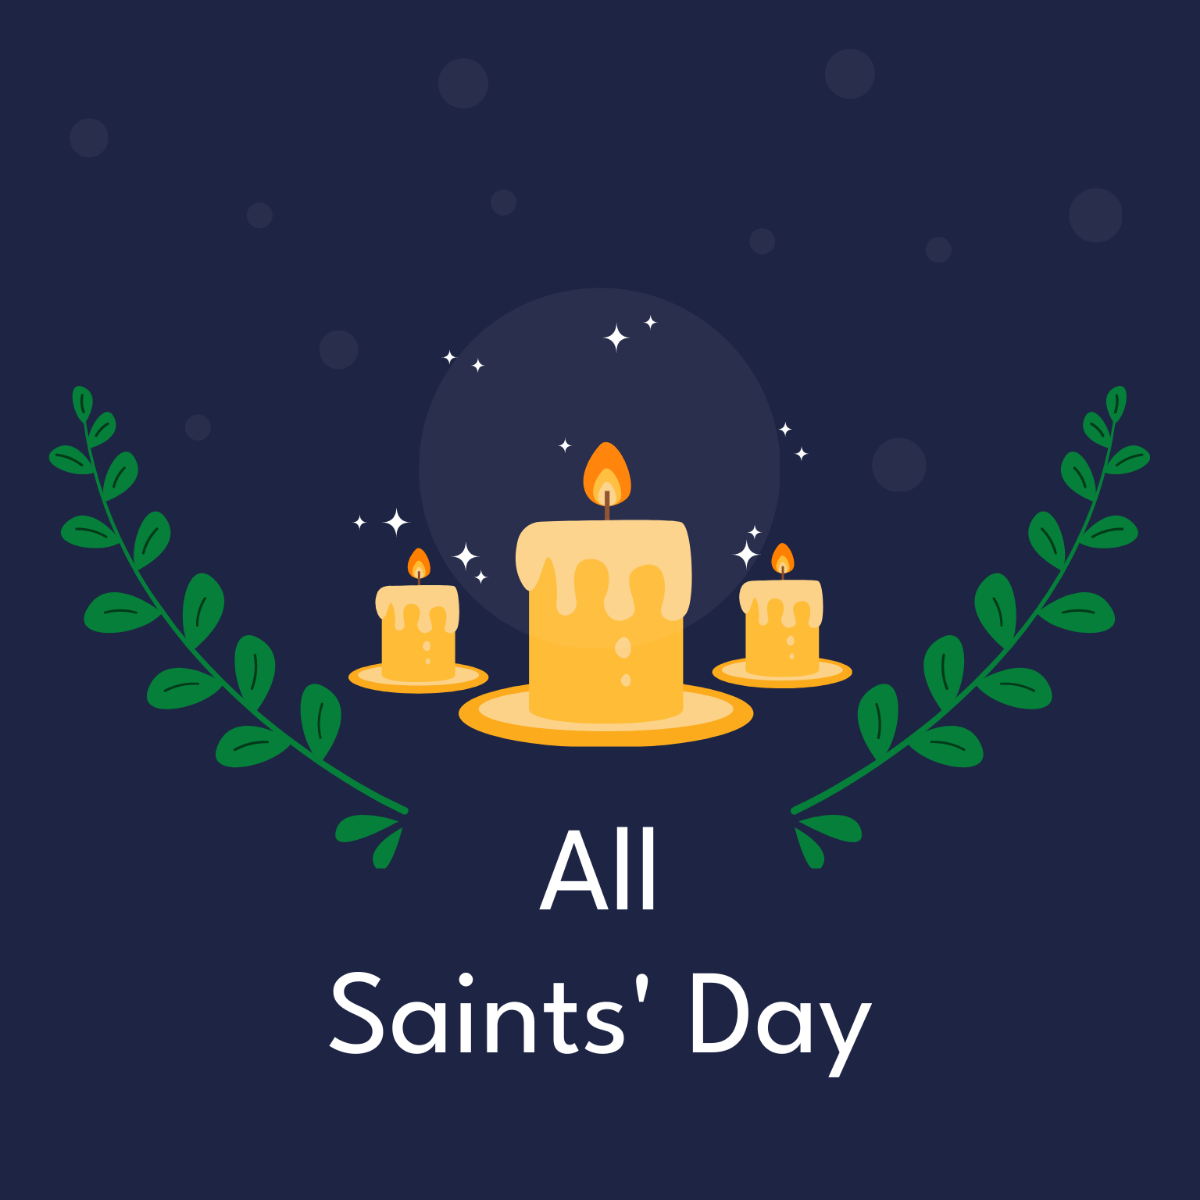 Free All Saints' Day Celebration Vector Template